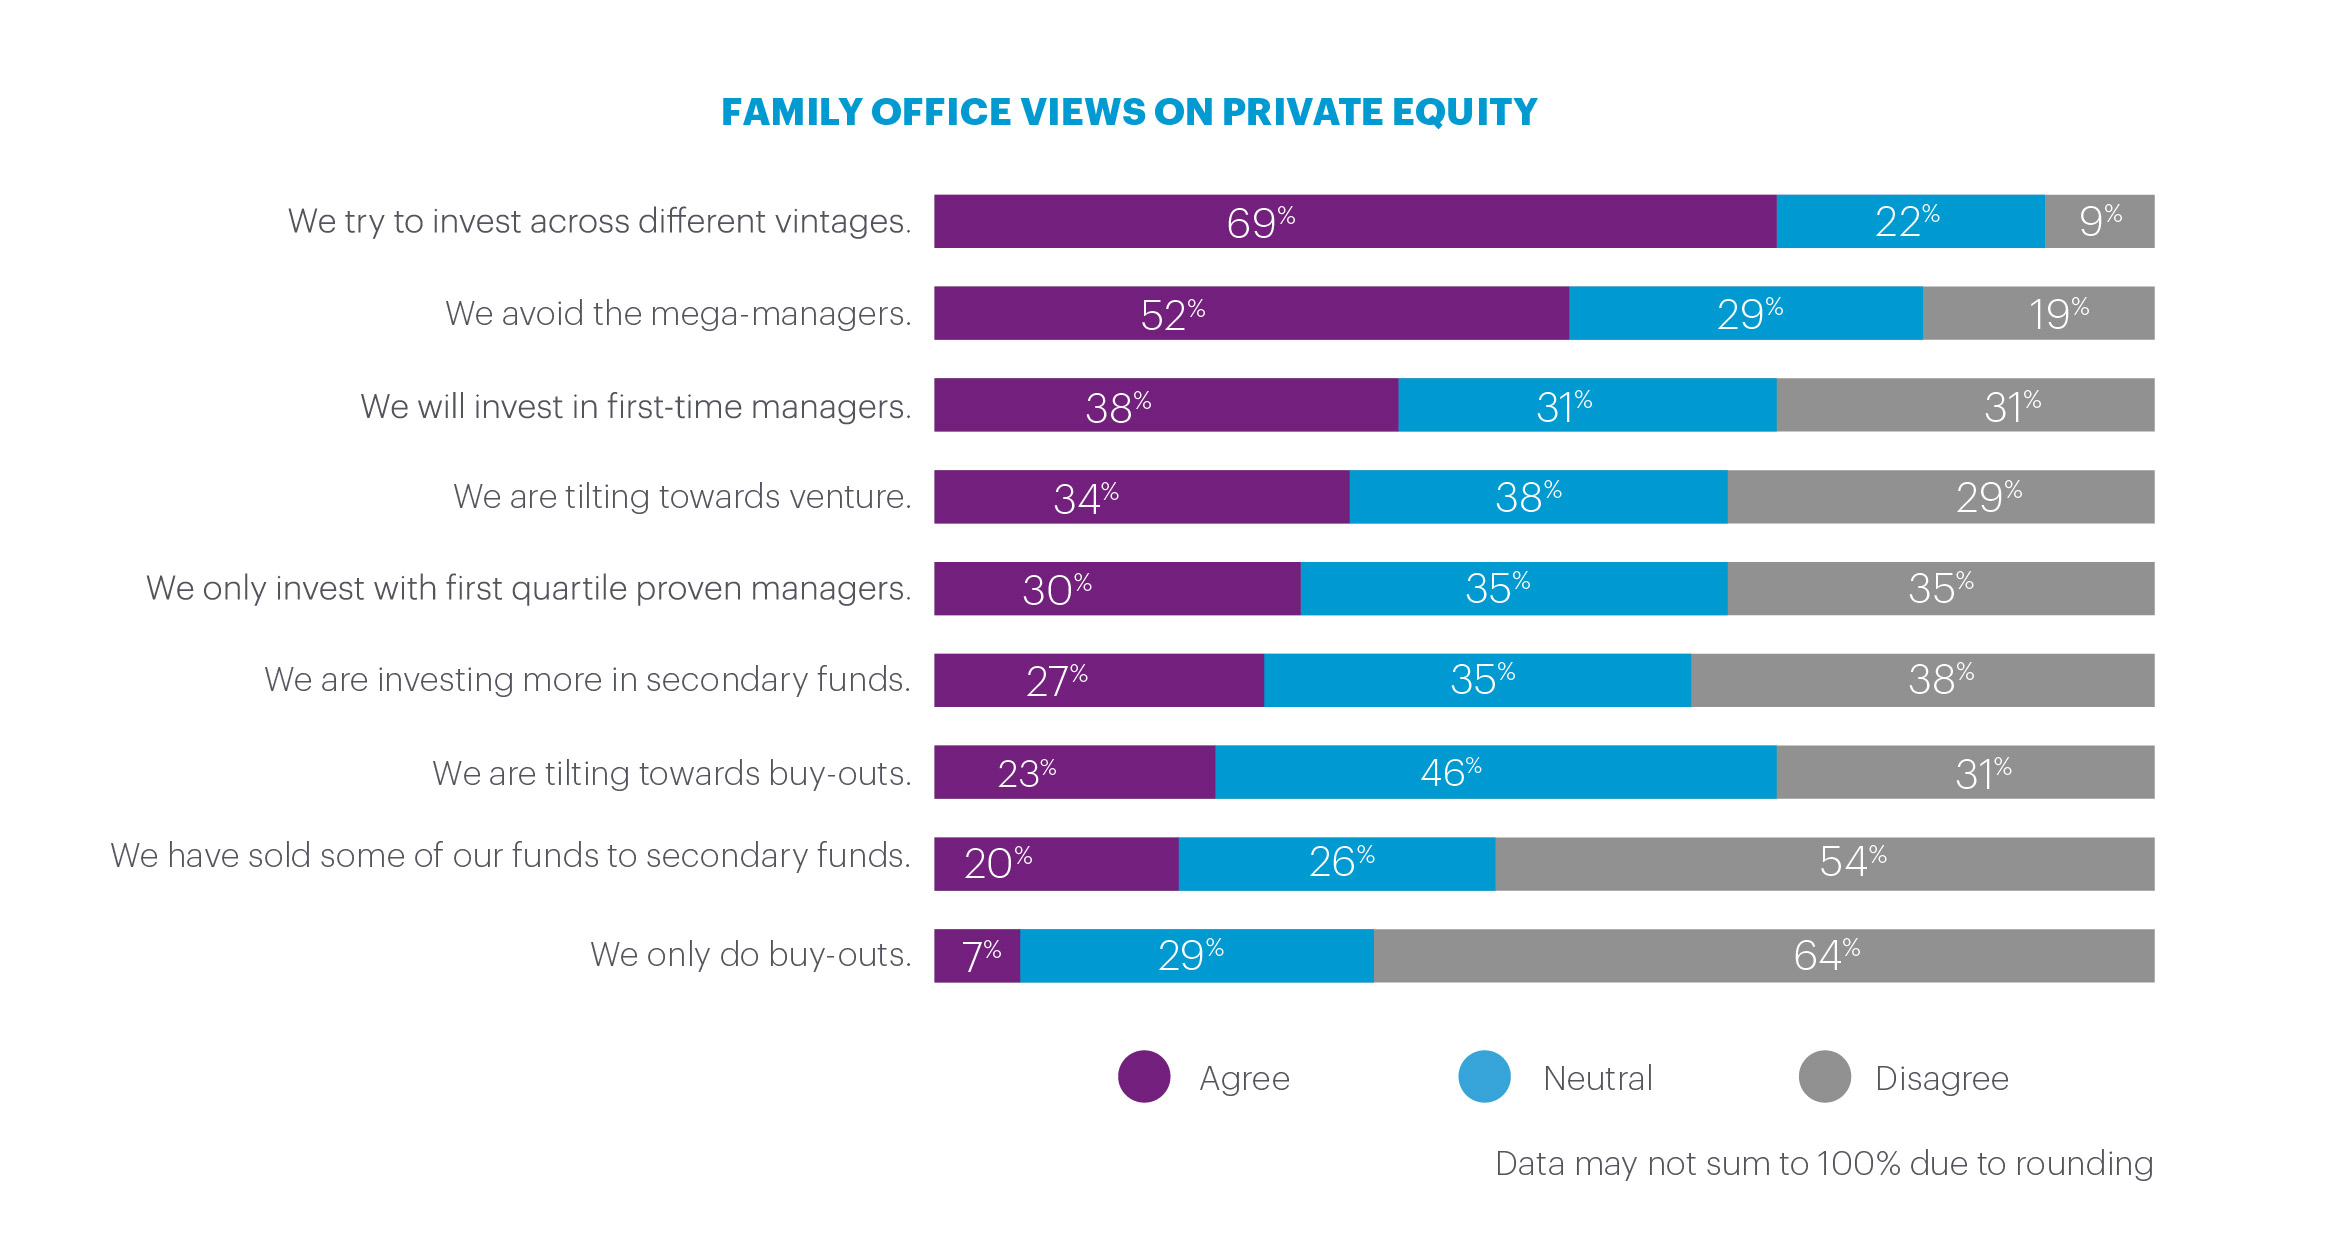 List of views and percentages of FO views on private equity